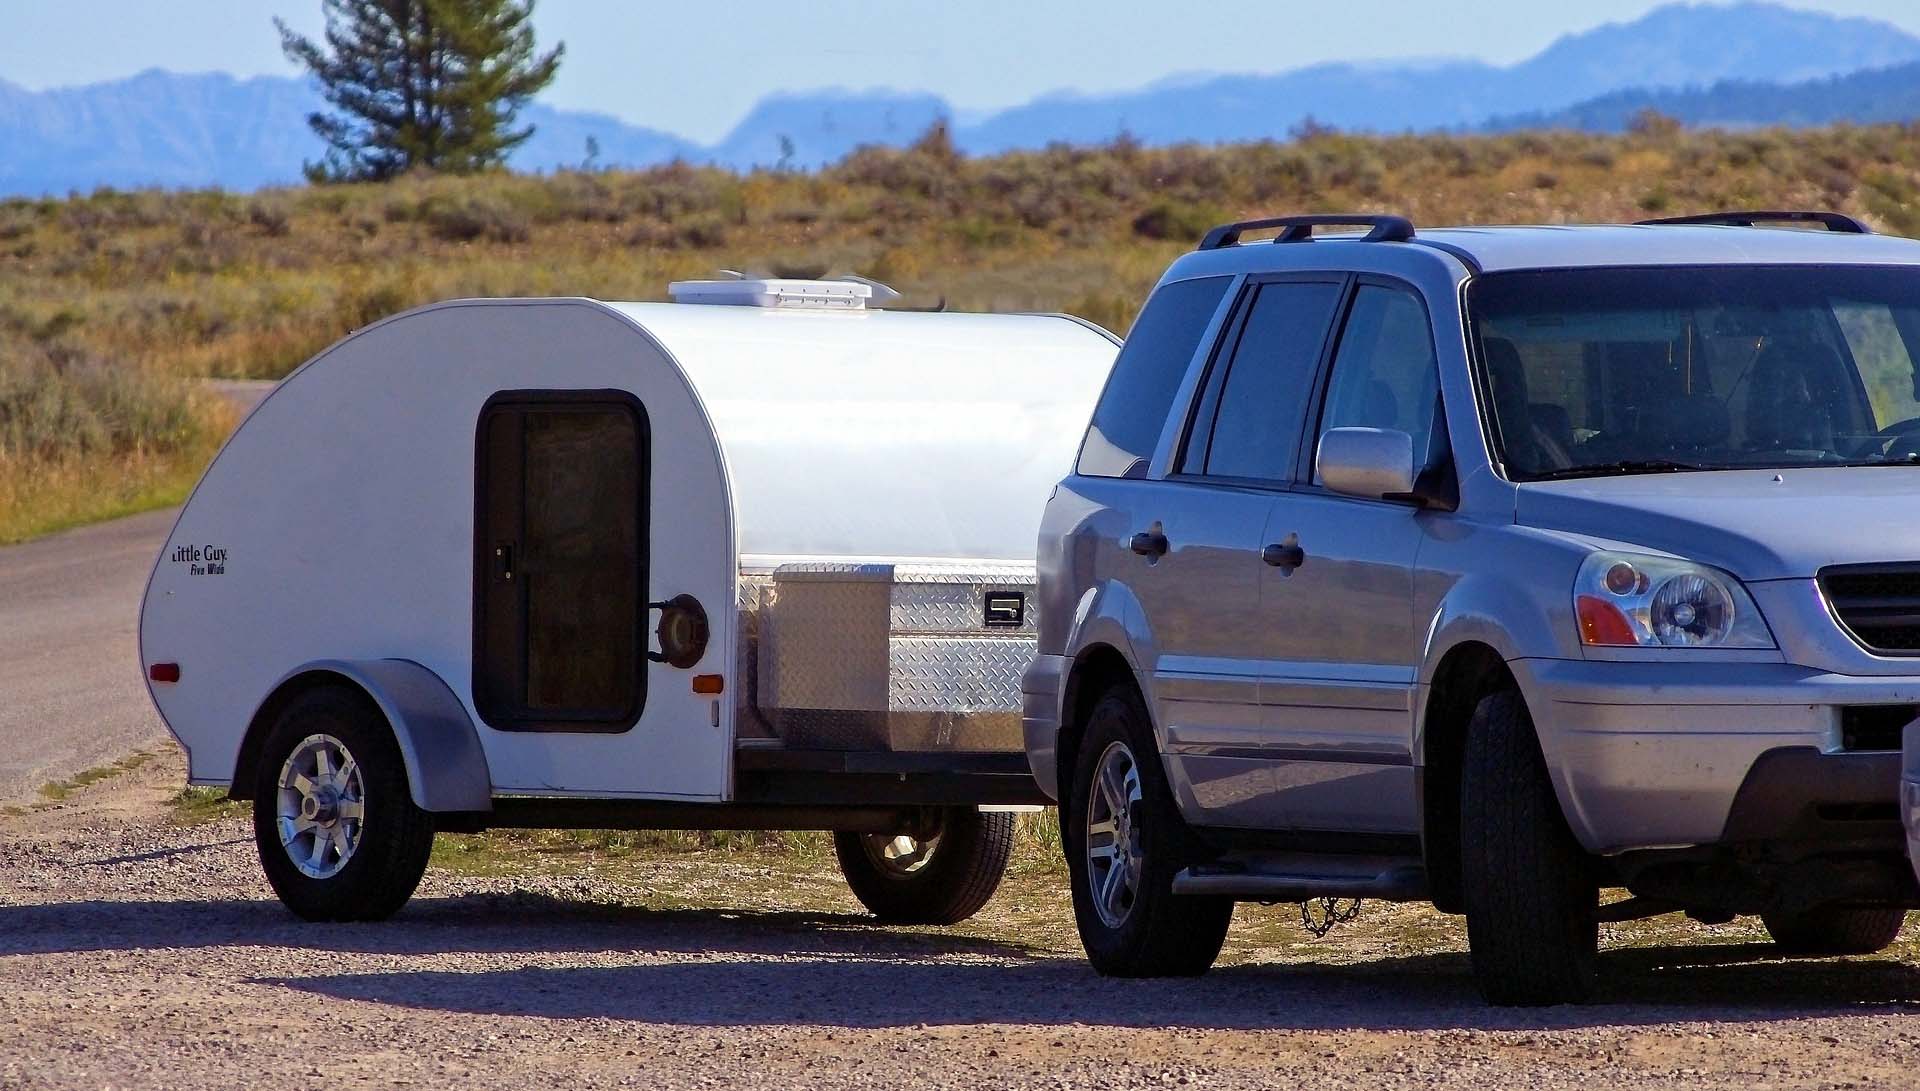 honda type vehicle towing a small tear-drop trailer.